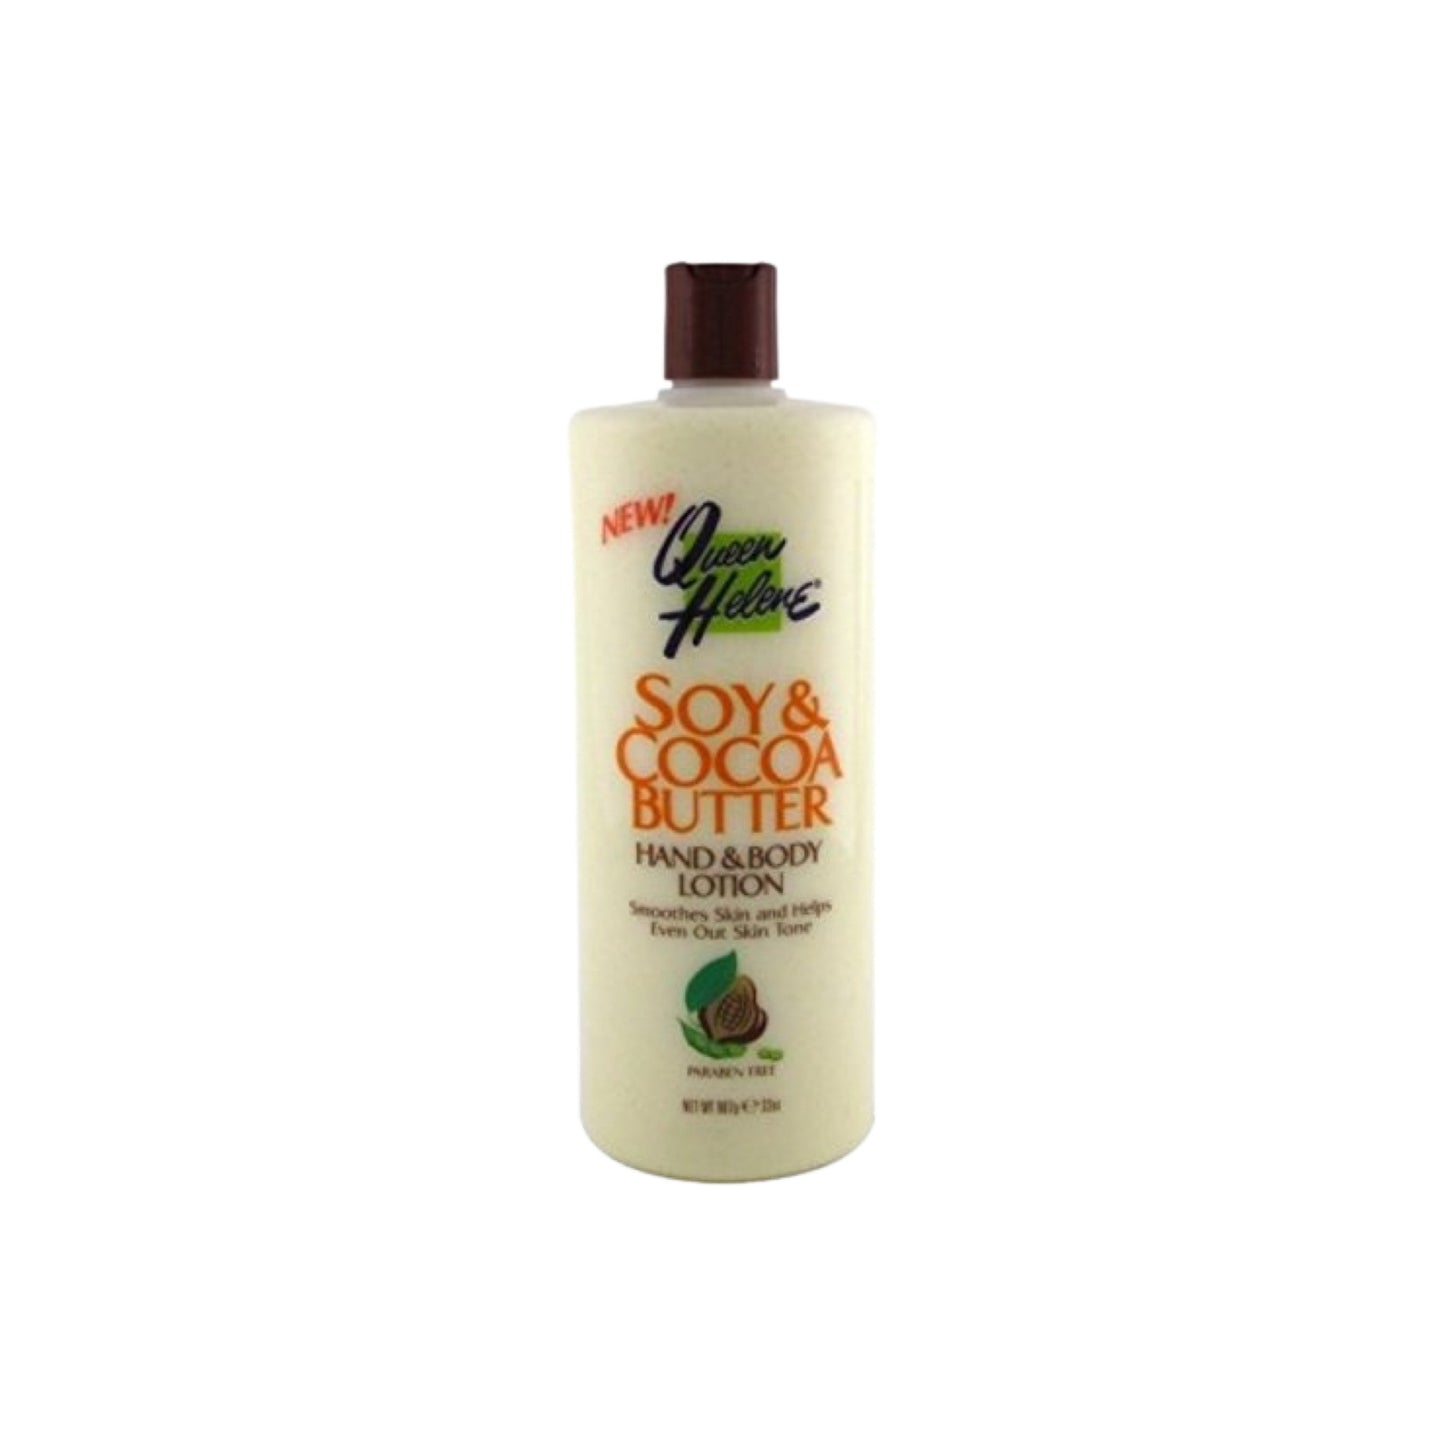 Queen Helene Lotion 32Oz Soy & Cocoa Butter